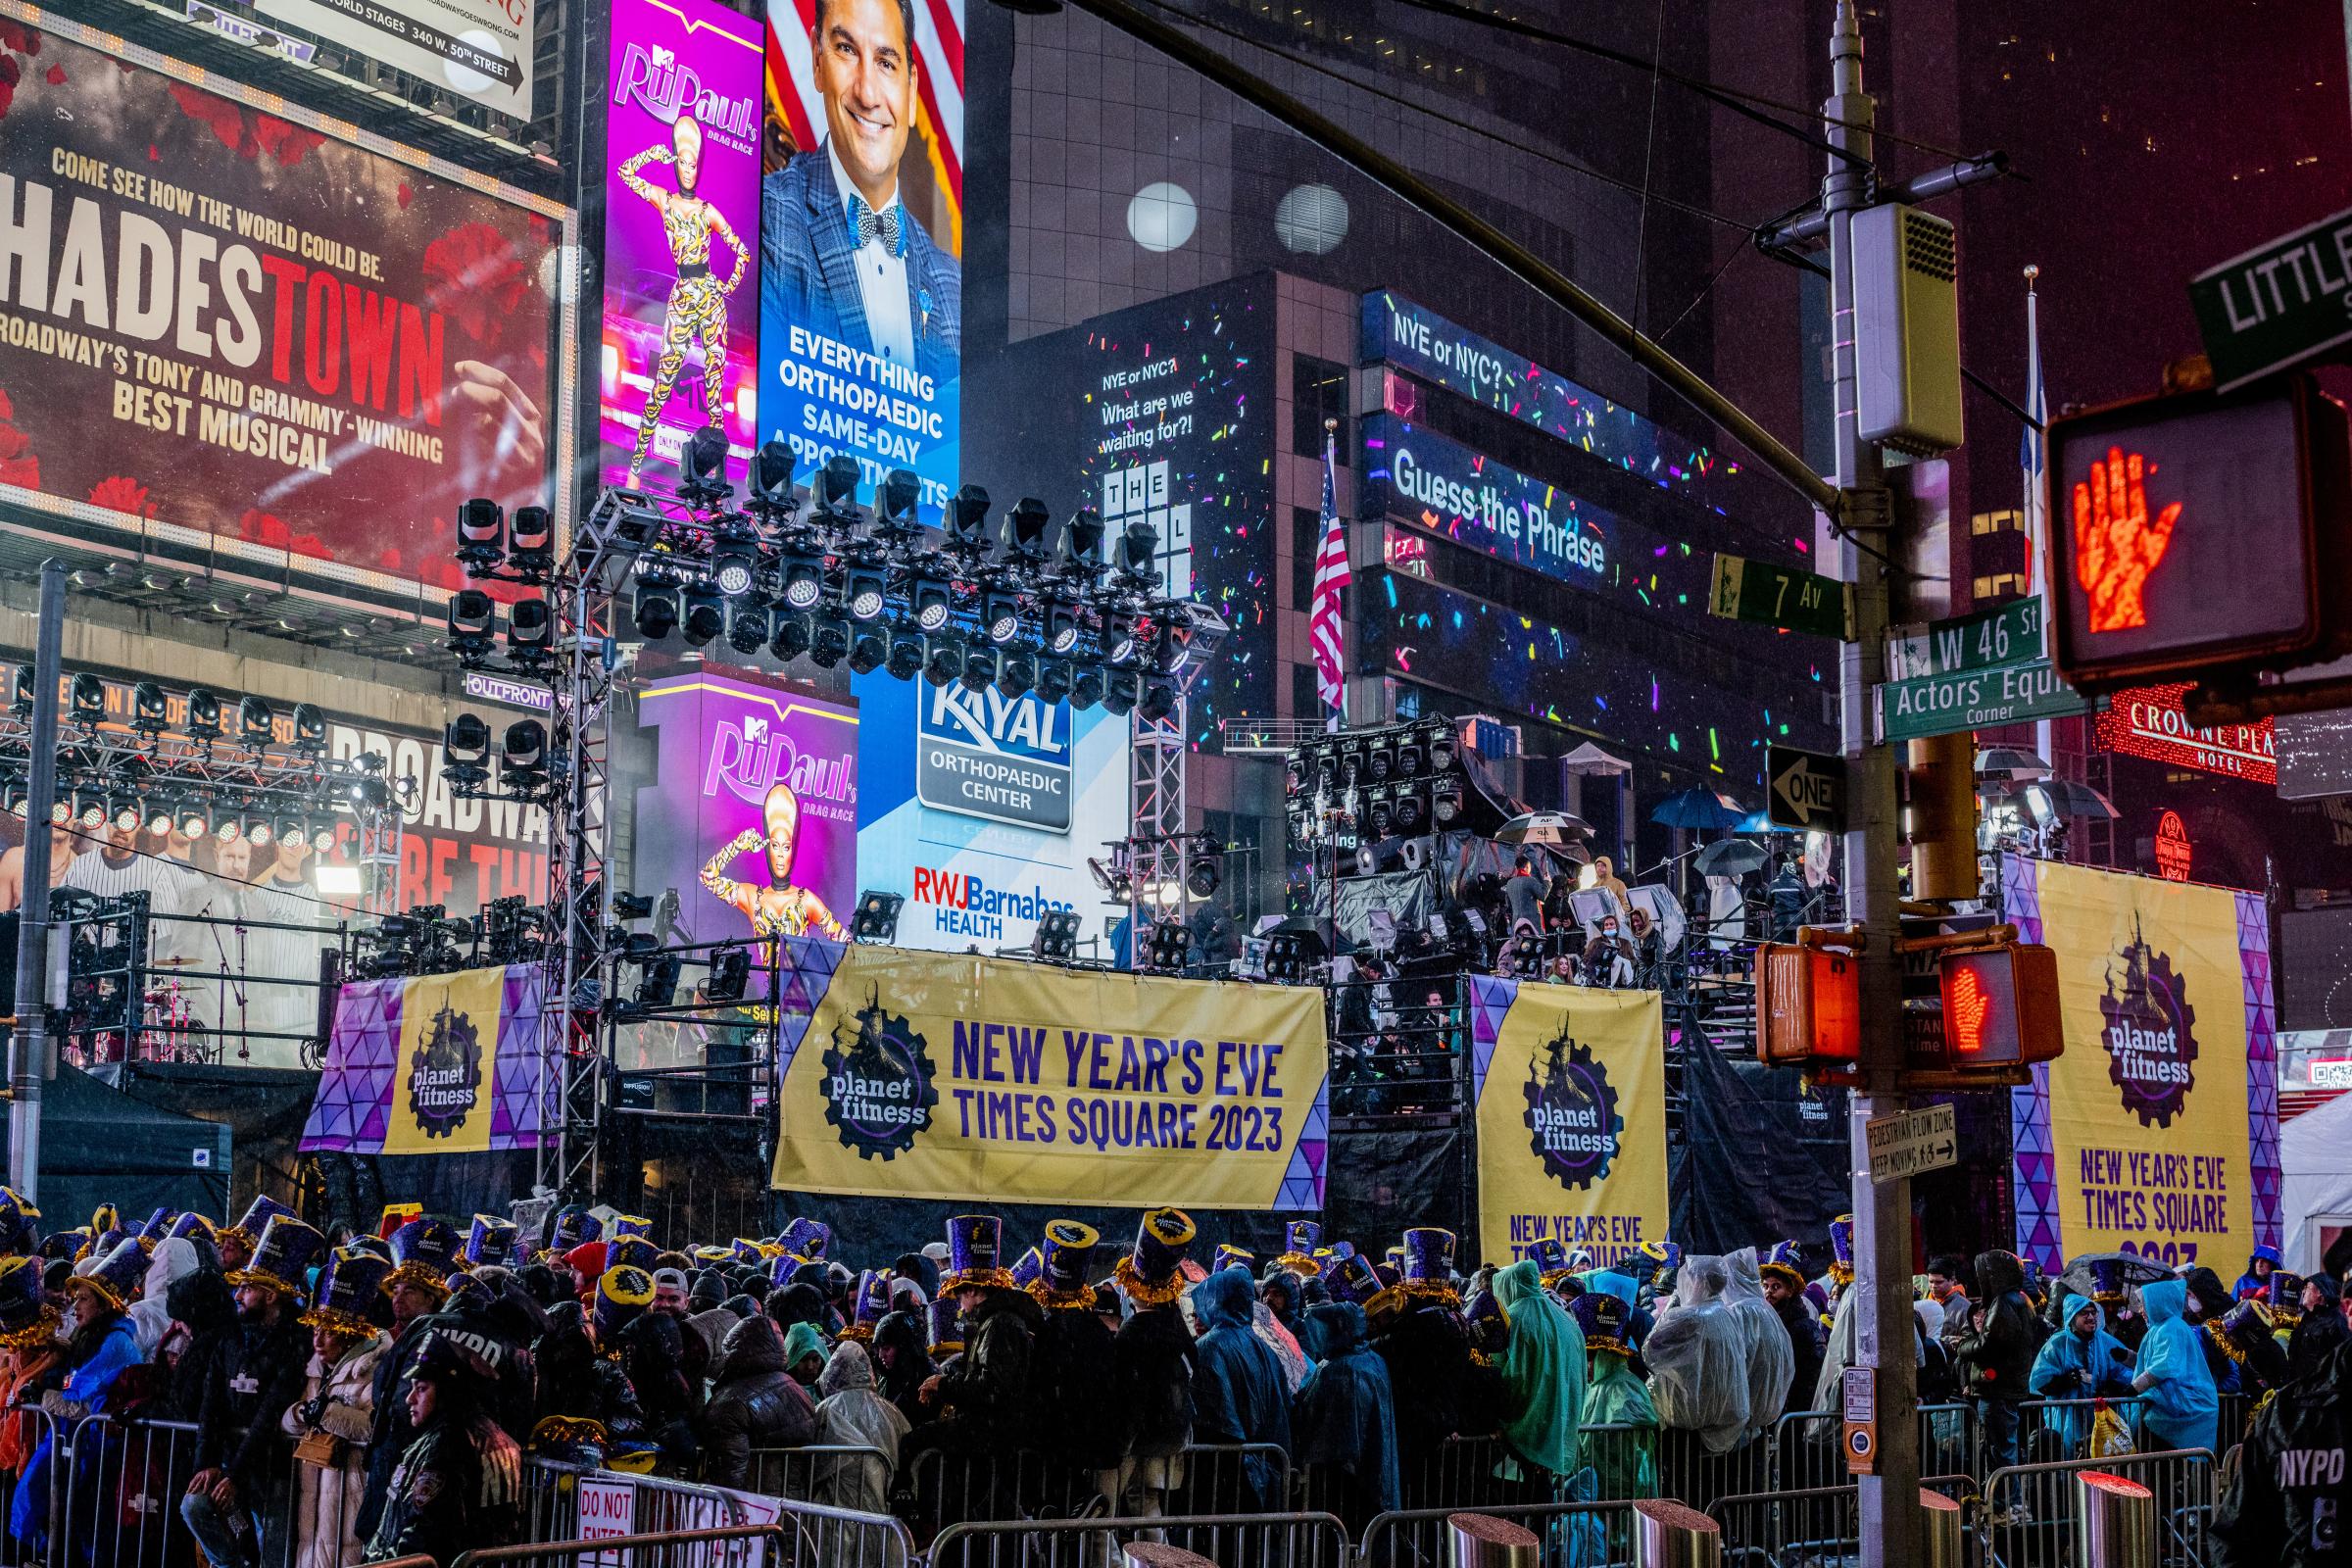 Times Square 2023 NYE Celebration - Times Square during the 2023 New Years Eve celebration in...